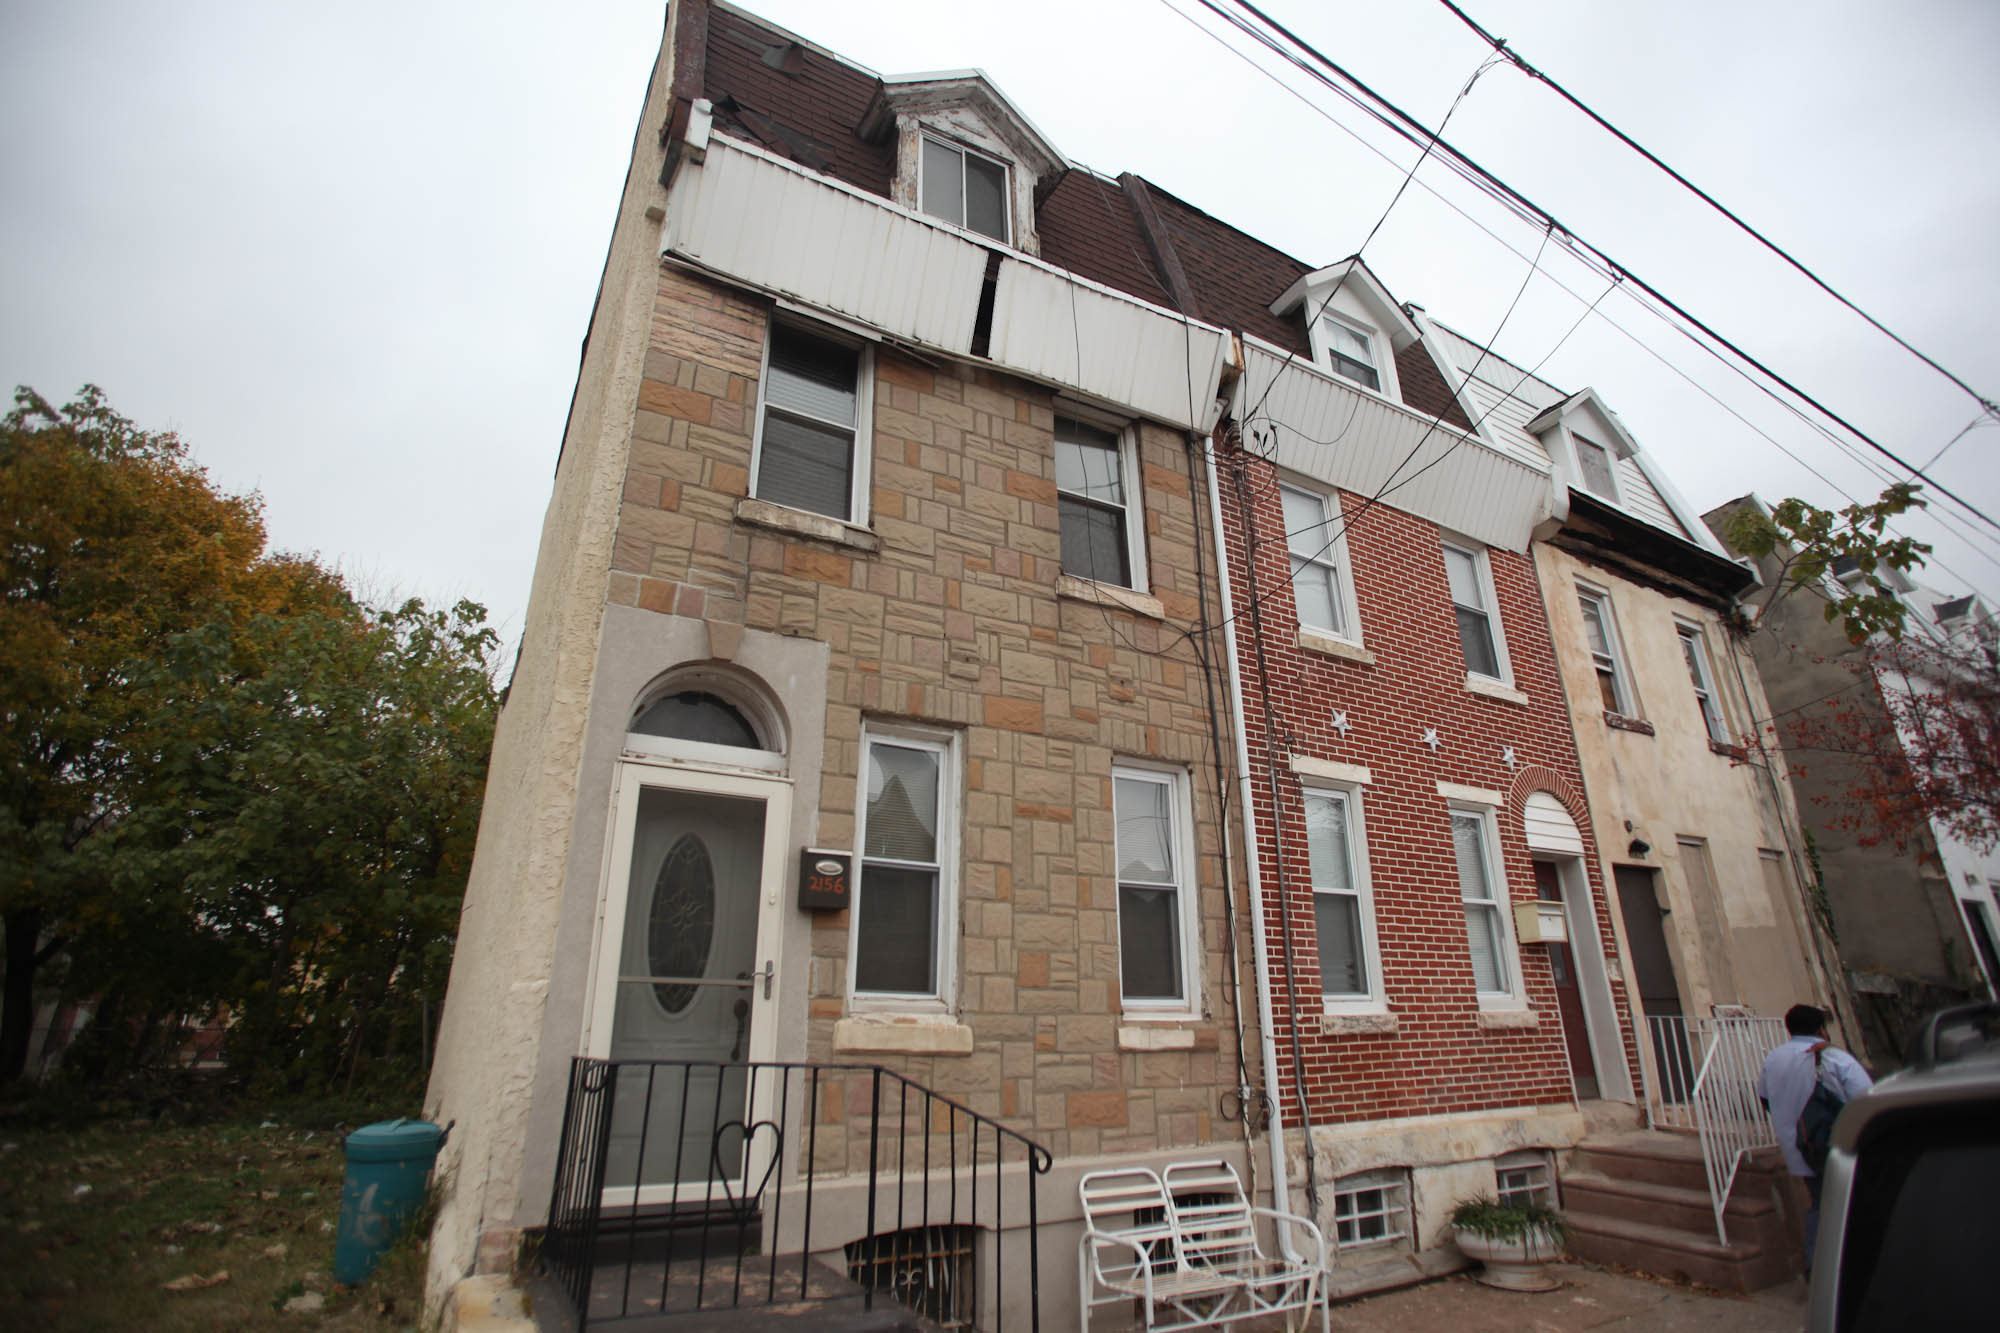 A group of typical Philadelphia rowhomes in Eastern North Philadelphia.